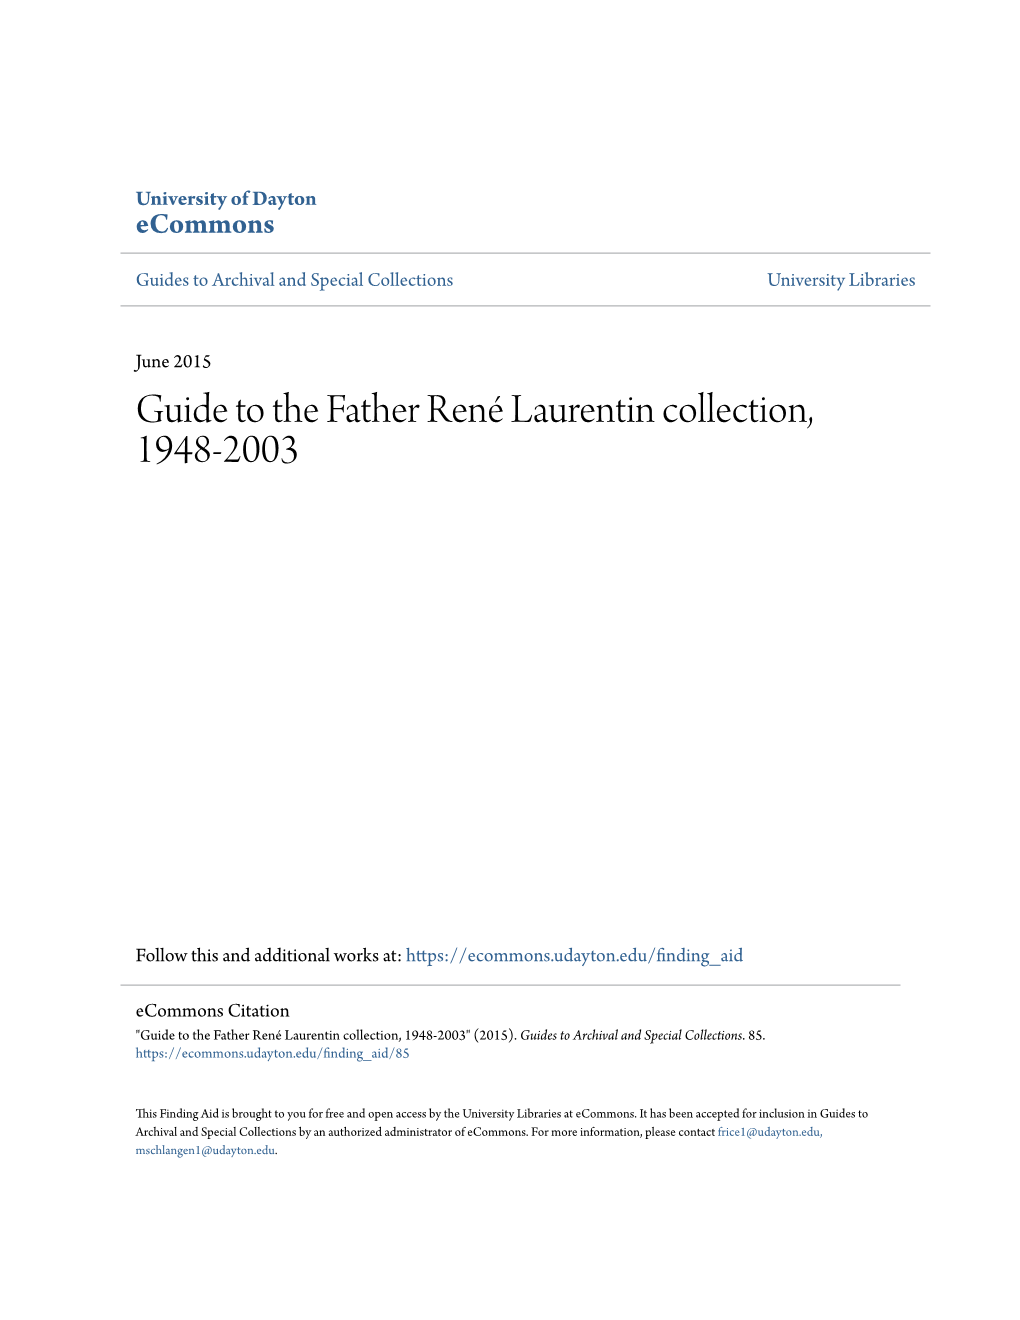 Guide to the Father René Laurentin Collection, 1948-2003